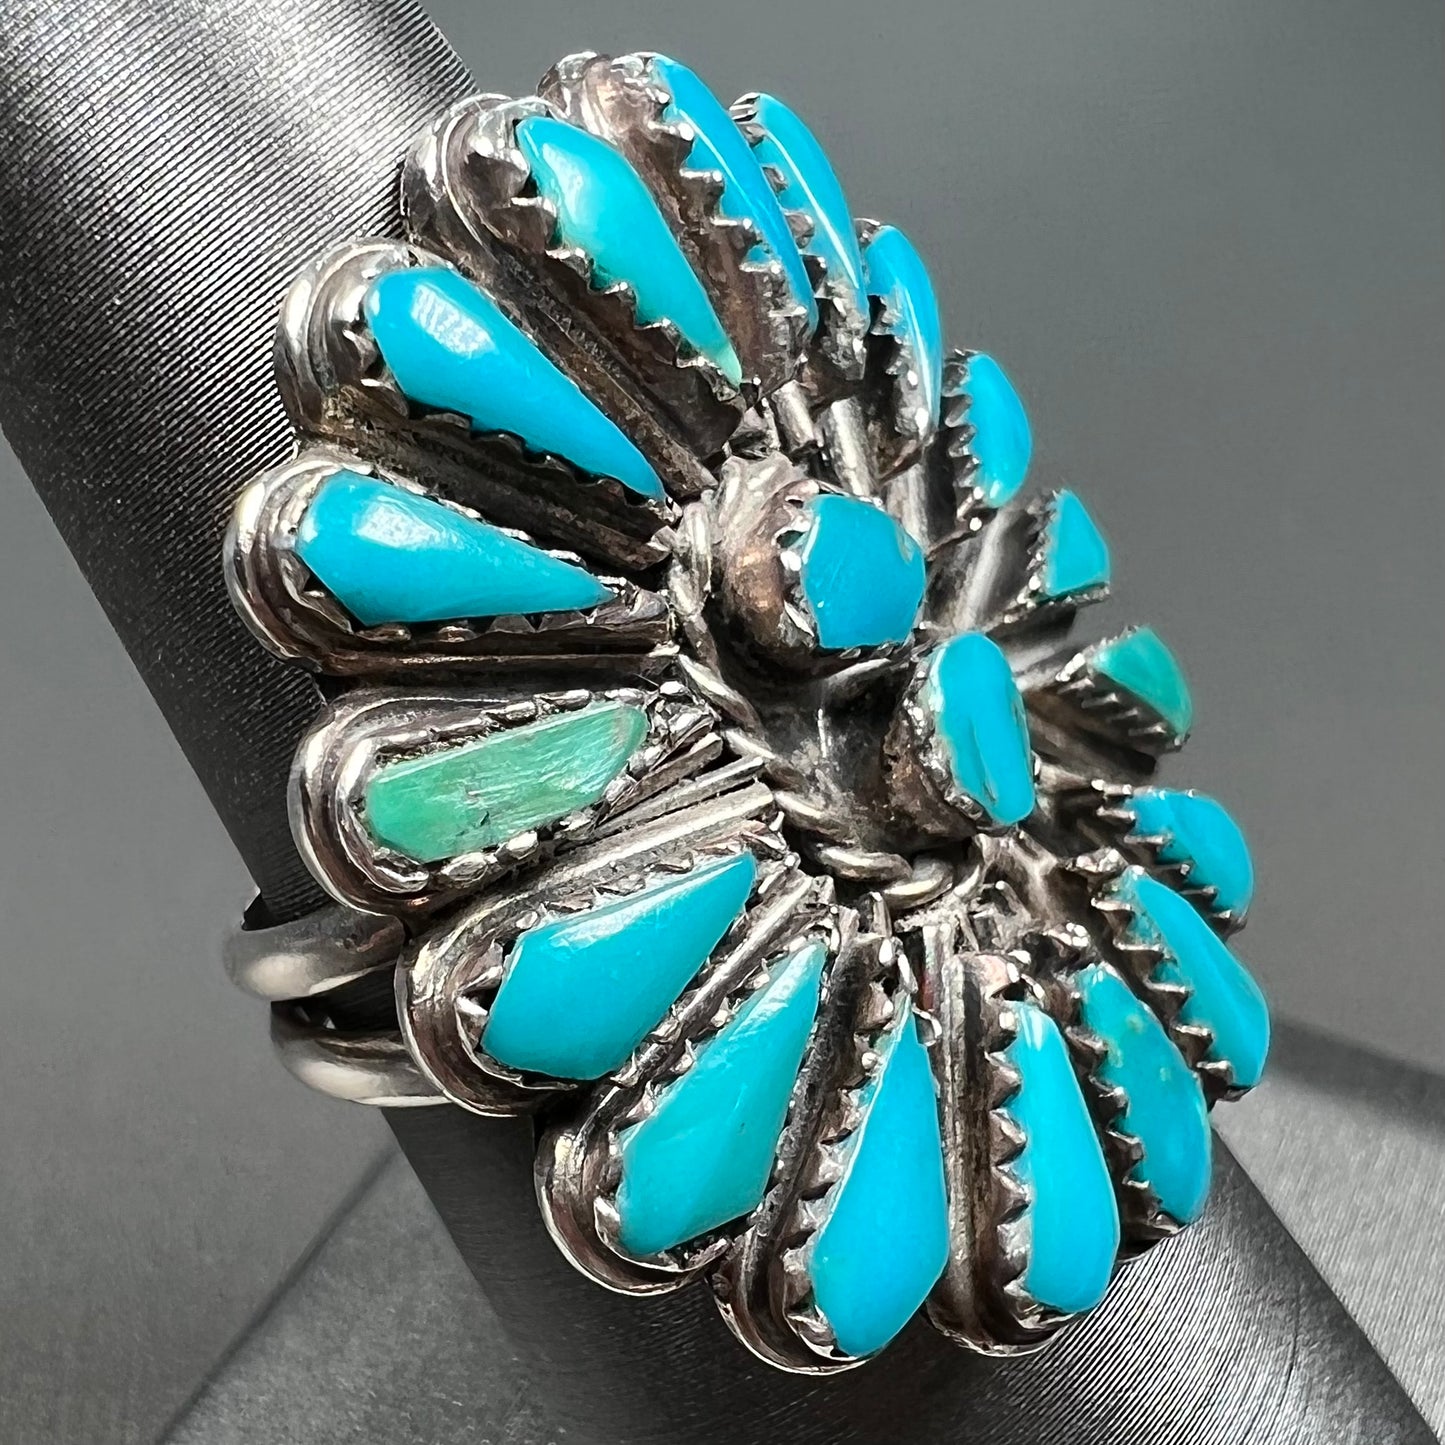 A handmade, sterling silver Zuni Indian ring petit point set with turquoise stones.  The ring has a split shank.